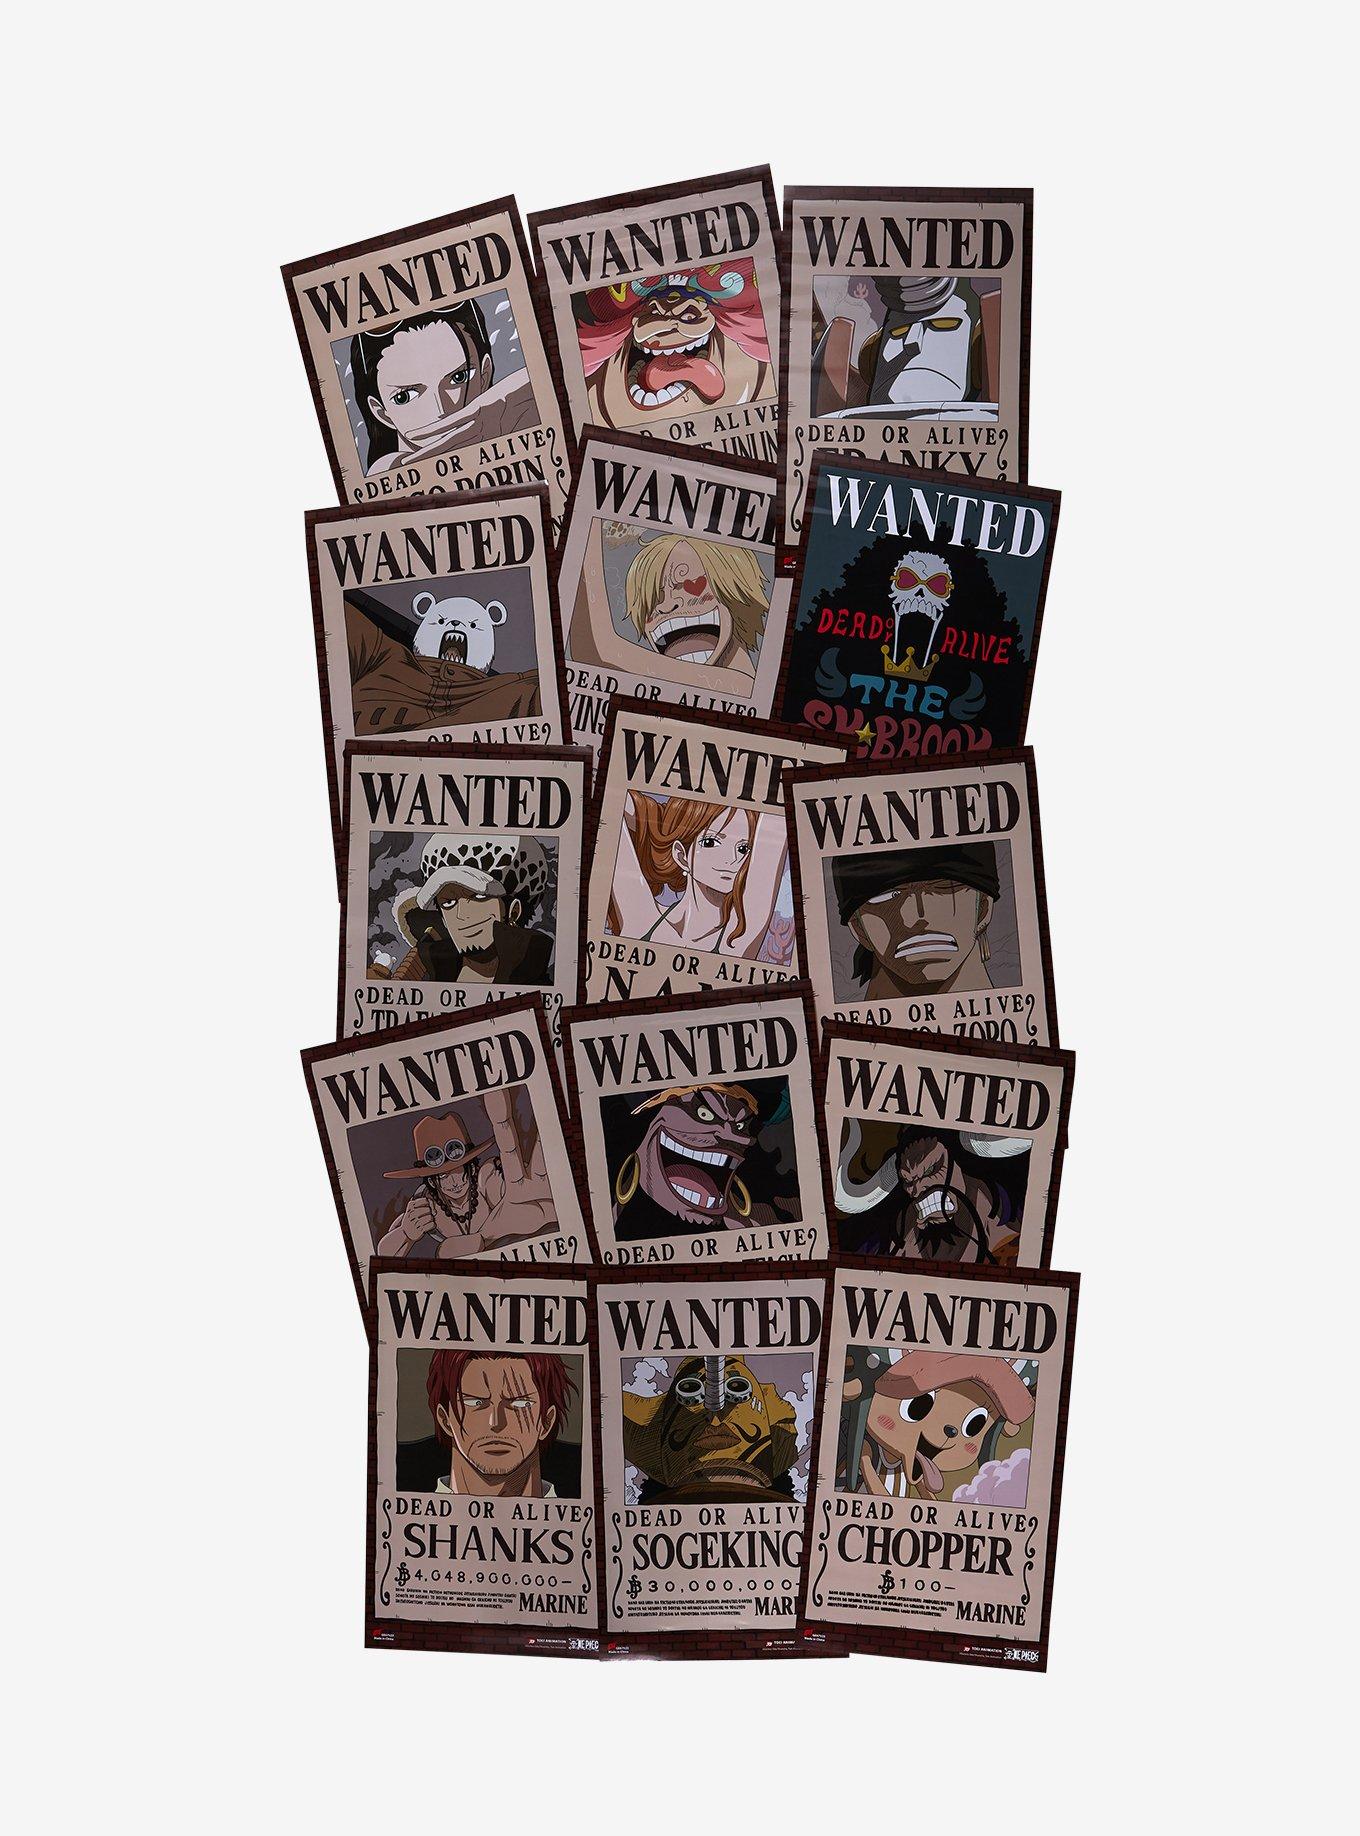 Buy naruto wanted poster online